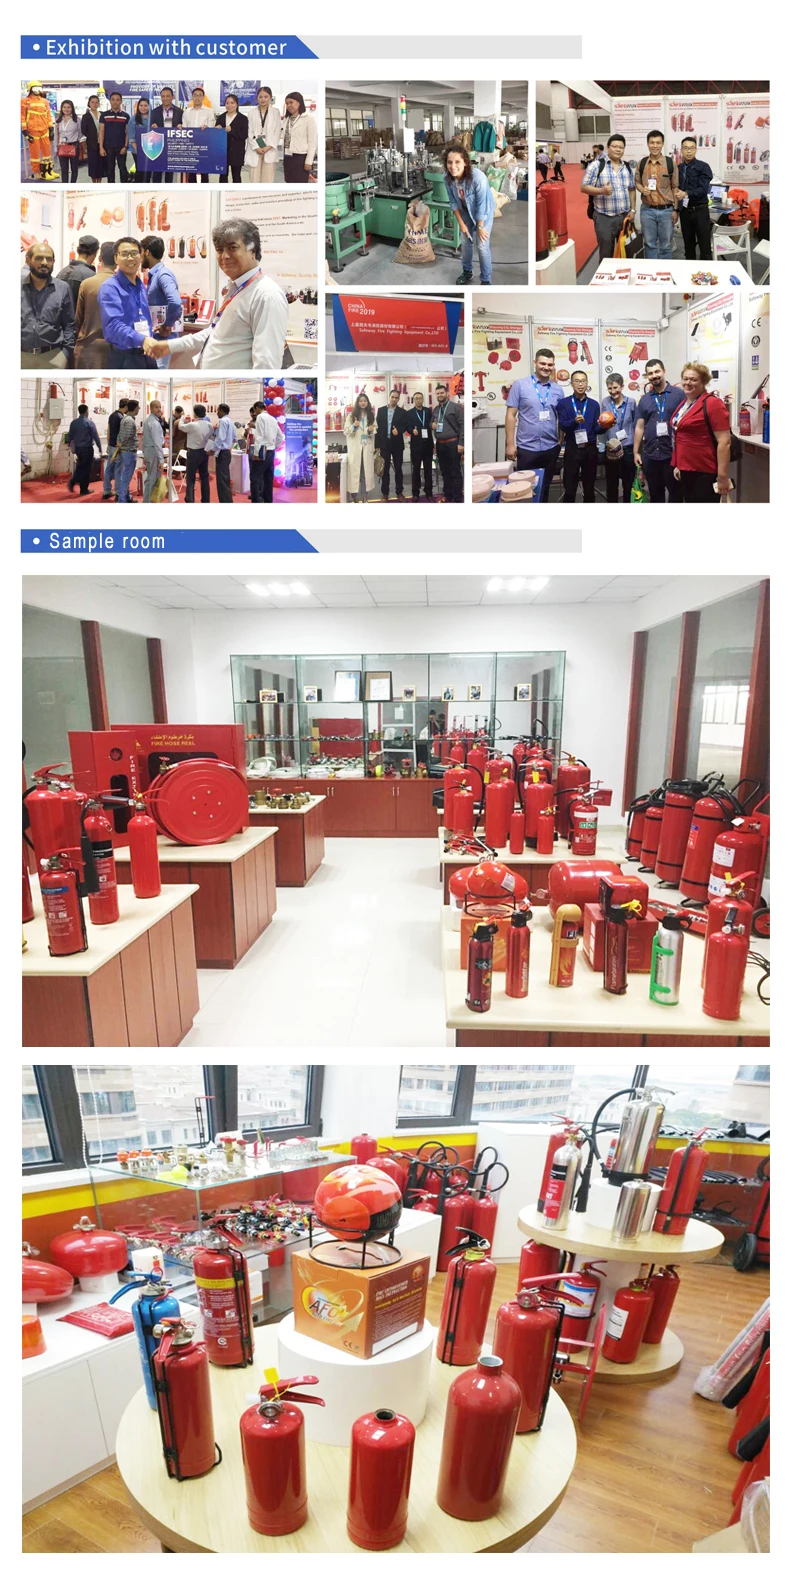 25KG CO2 wheeled type fire extinguisher cheap price 25kg co2 fire extinguisher